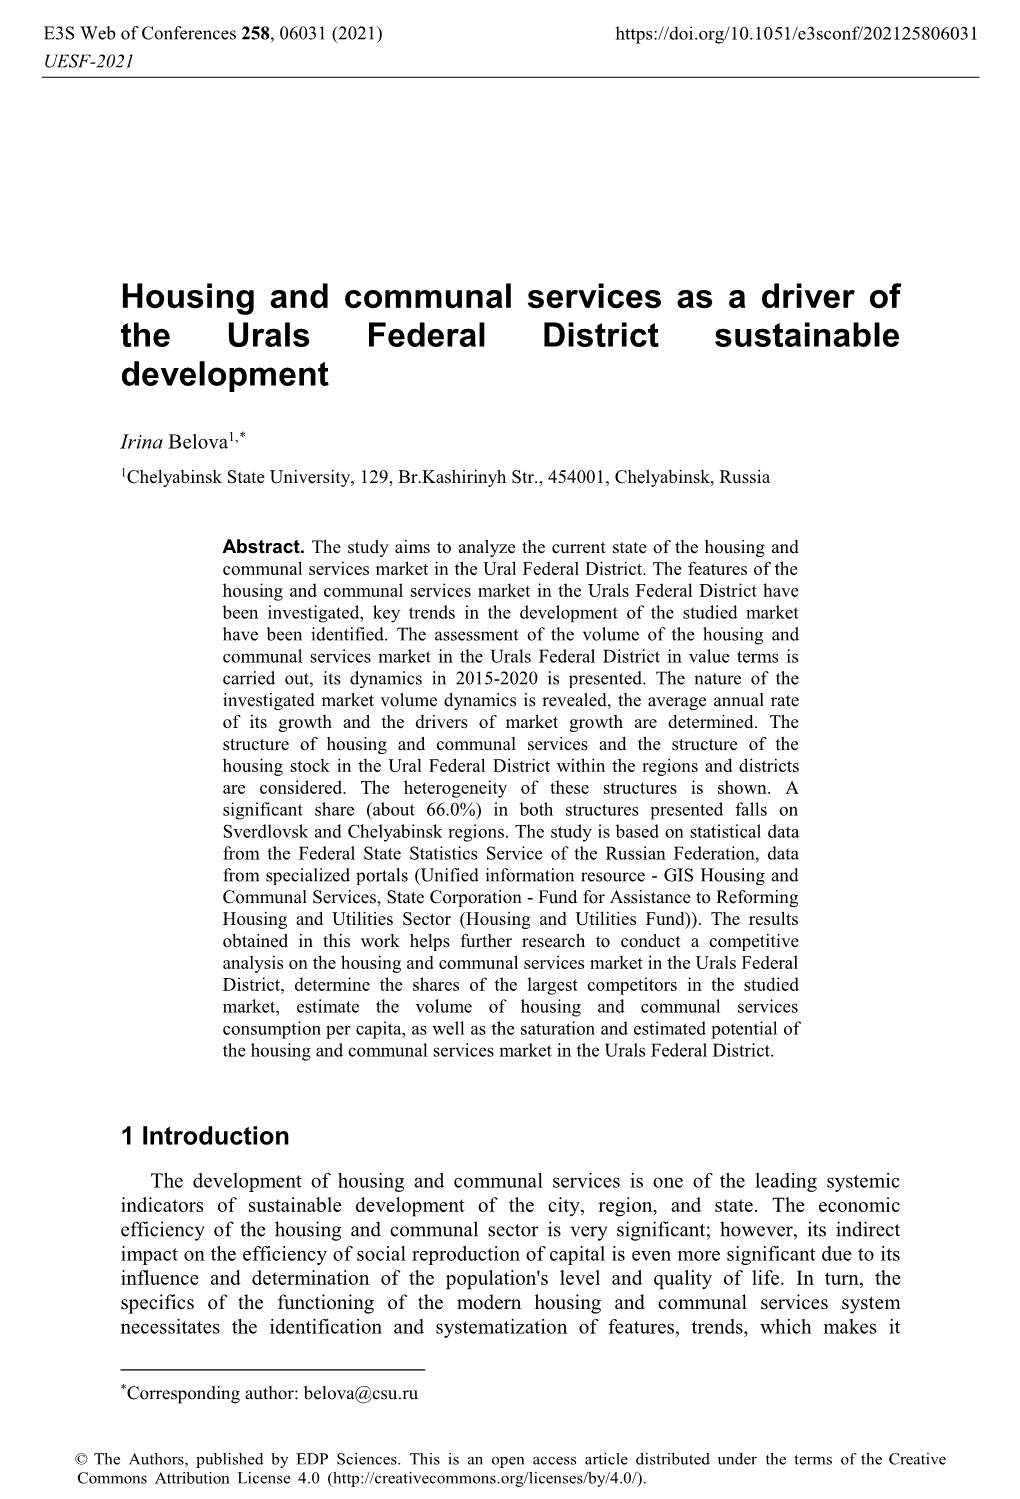 Housing and Communal Services As a Driver of the Urals Federal District Sustainable Development